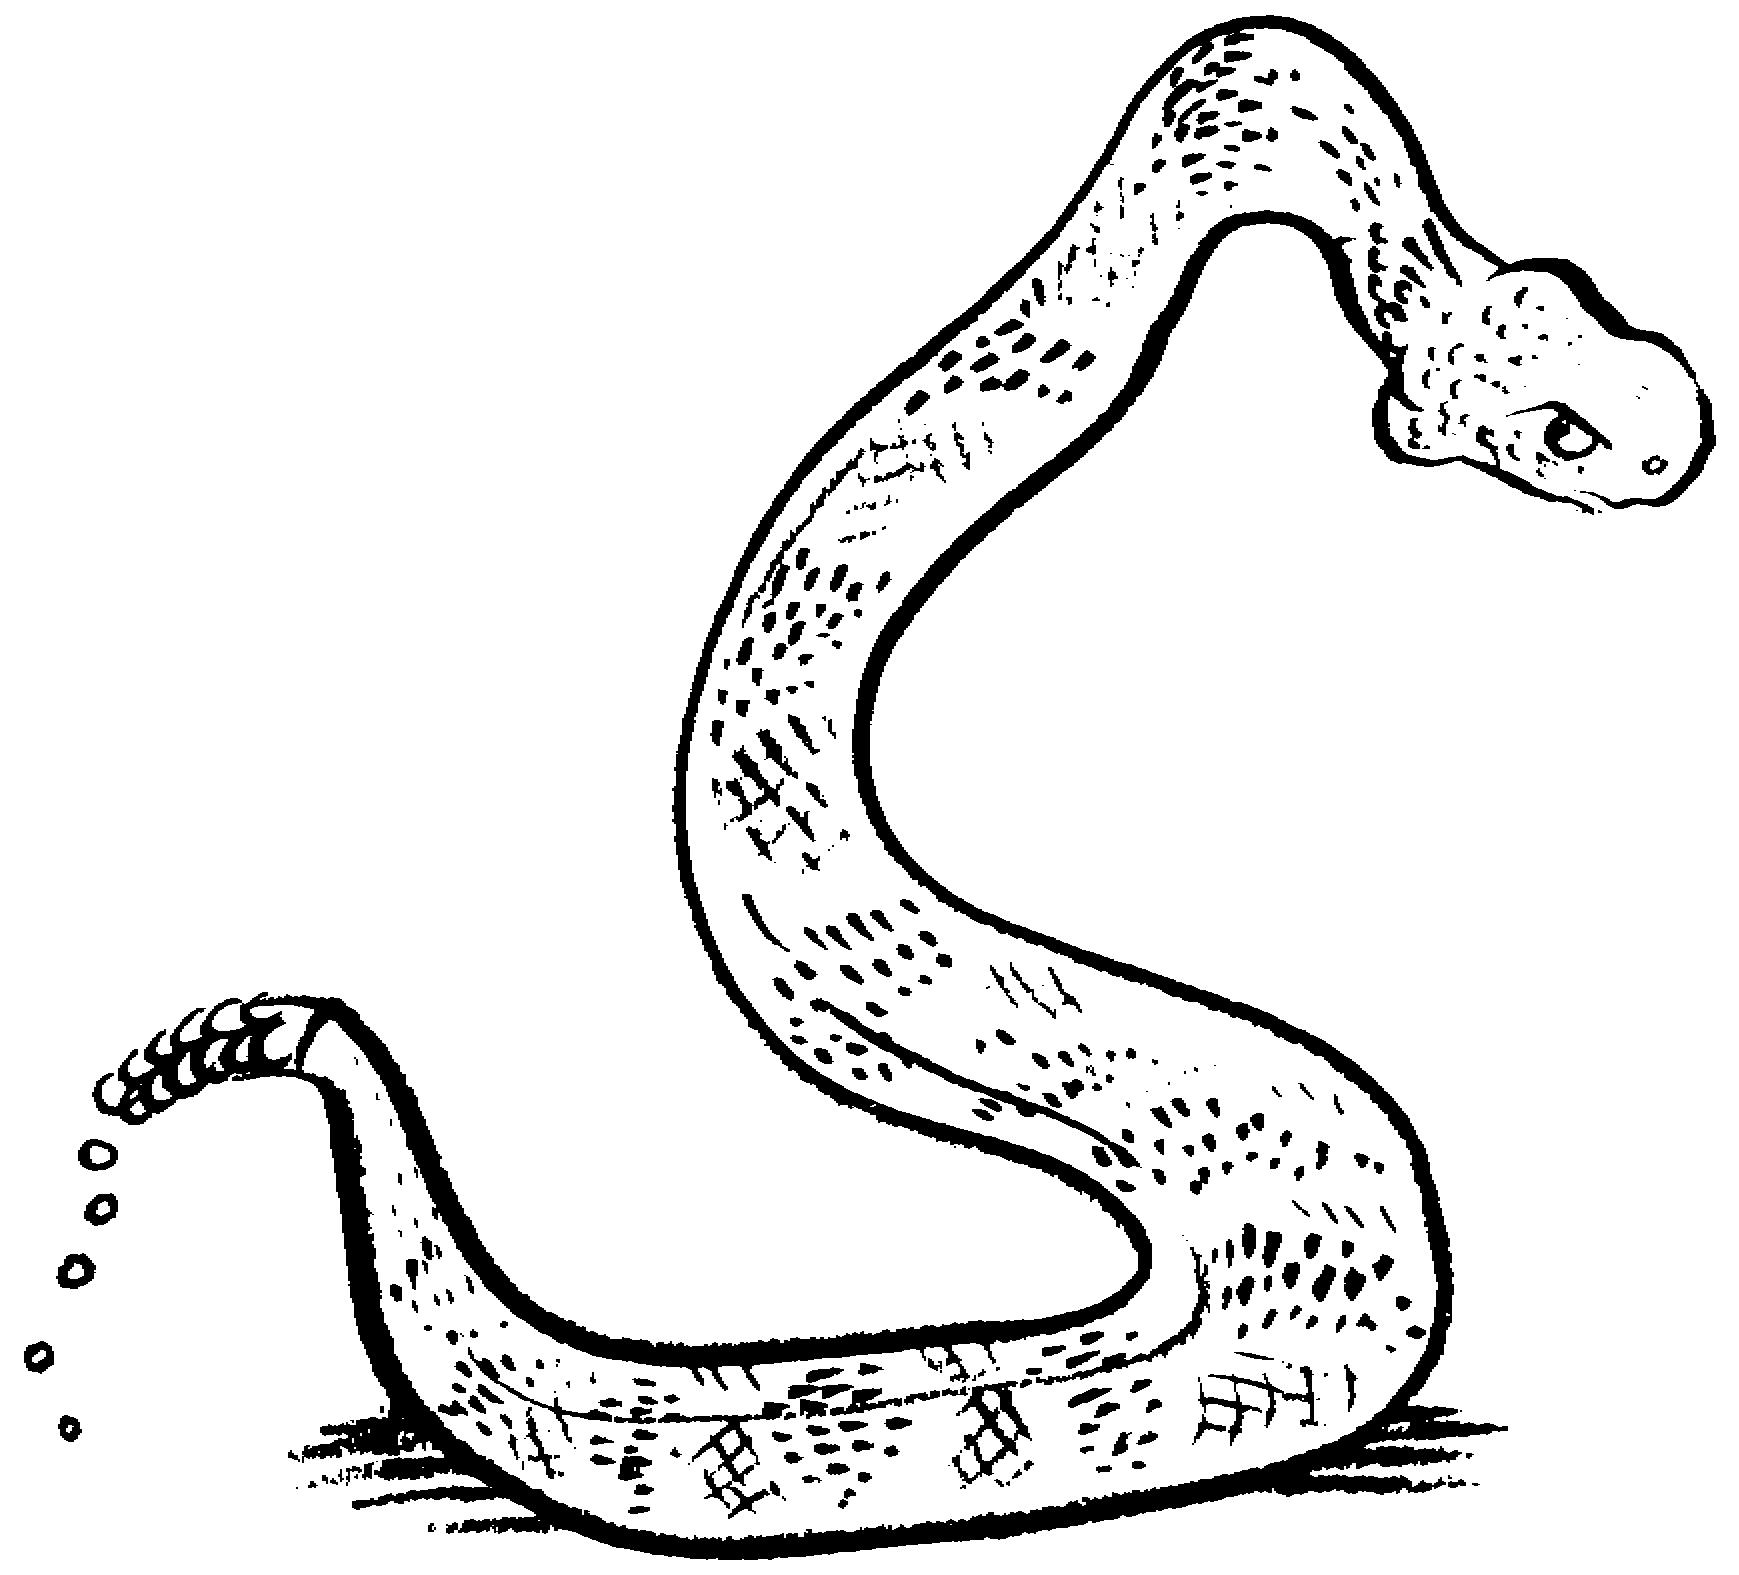 Cartoon snakes clip art page 2 snake images clipart free 4 2